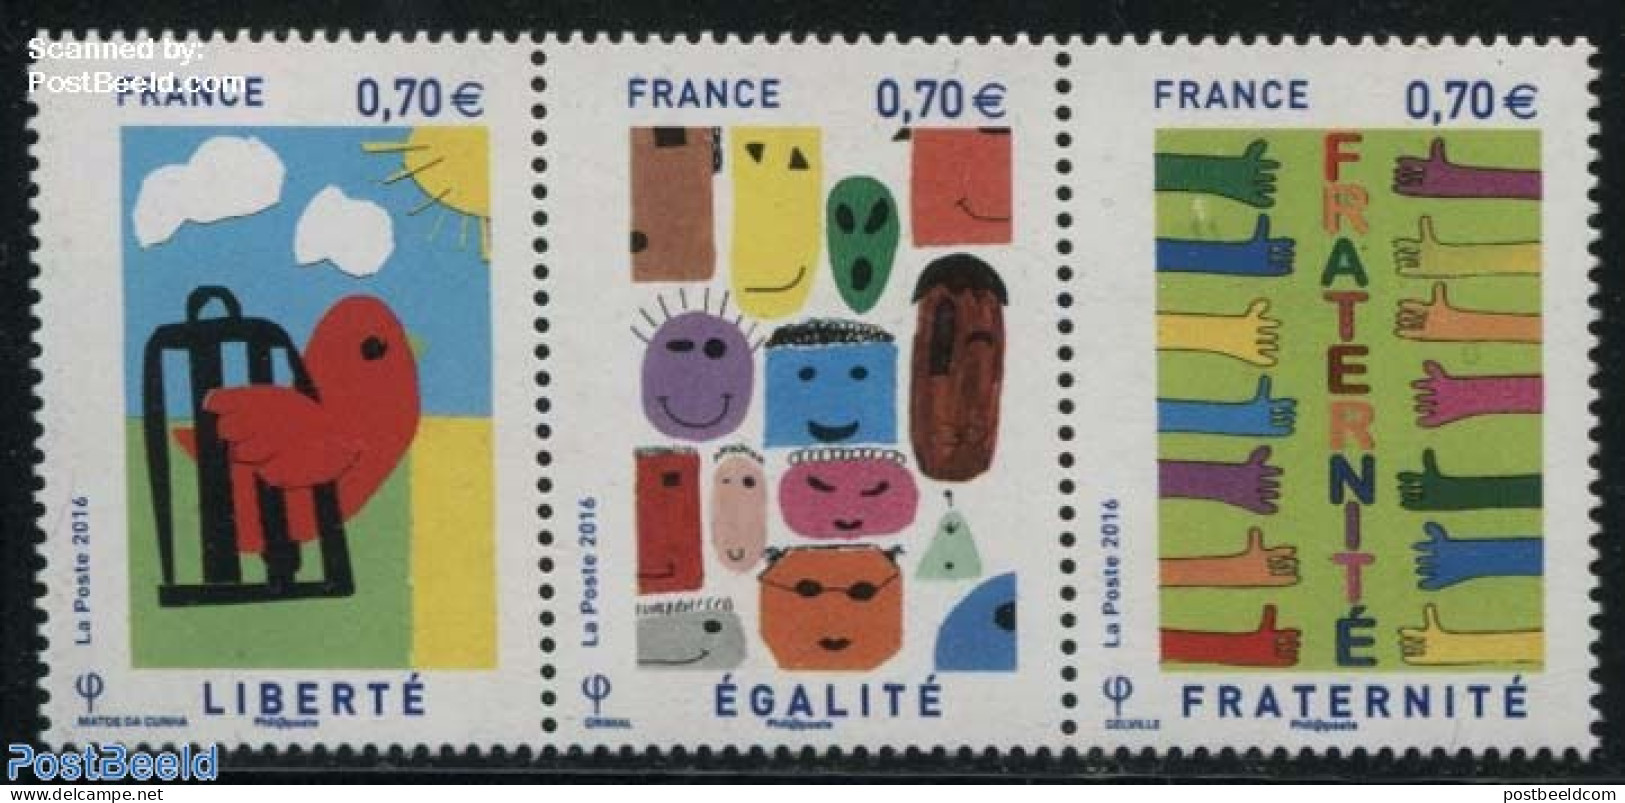 France 2016 Liberty-Equality-Fraternity 3v [::], Mint NH, Art - Children Drawings - Unused Stamps